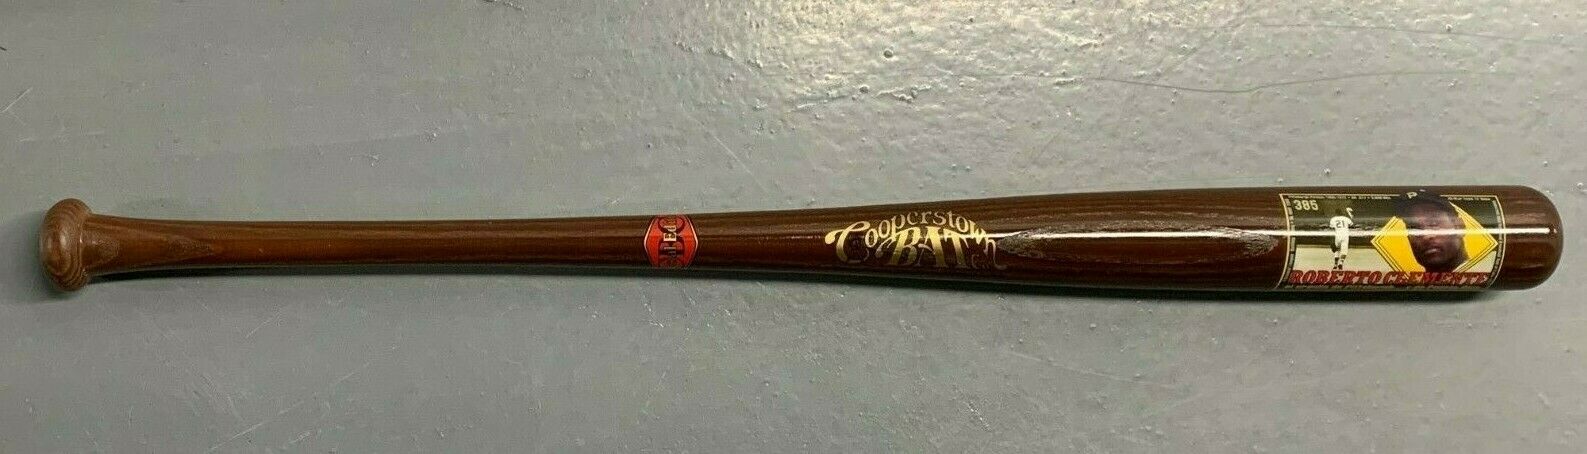 1994 Cooperstown Roberto Clemente Special Edition Bat